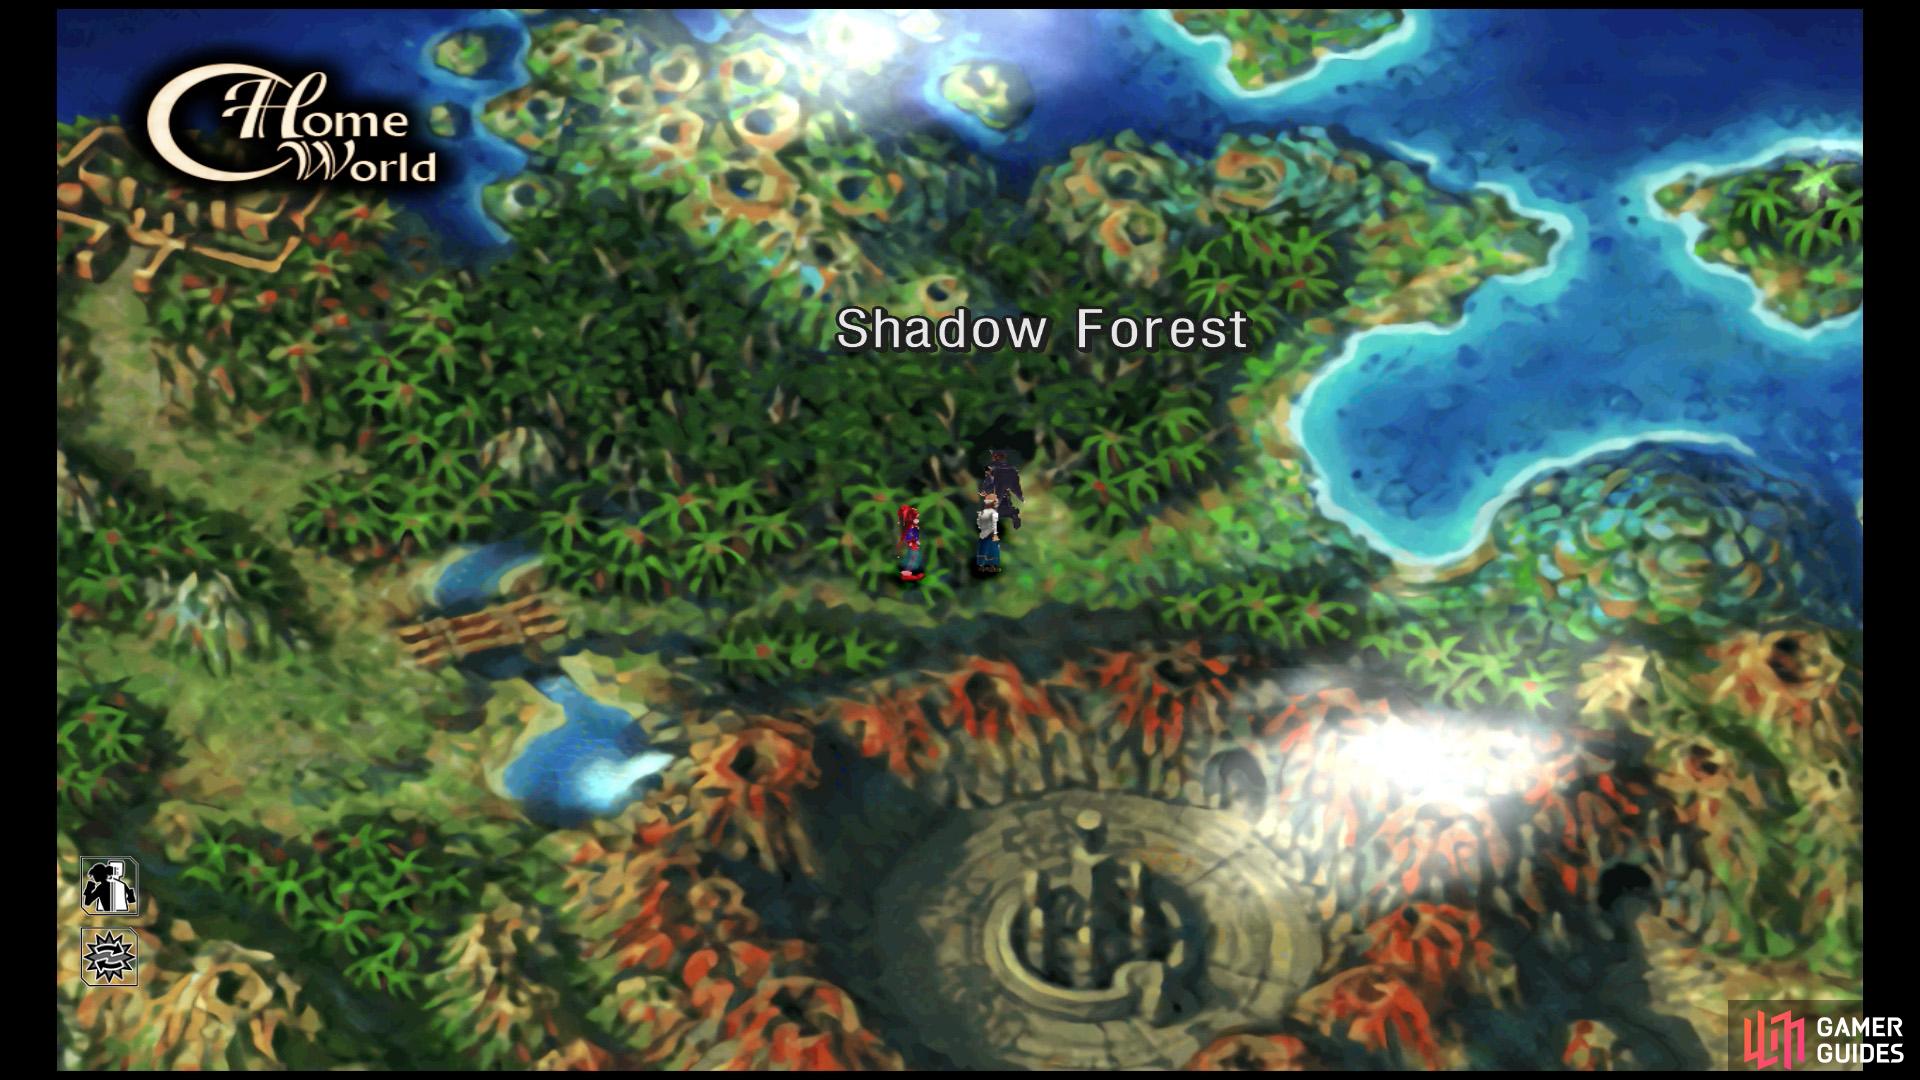 Enter Shadow Forest in Home World.